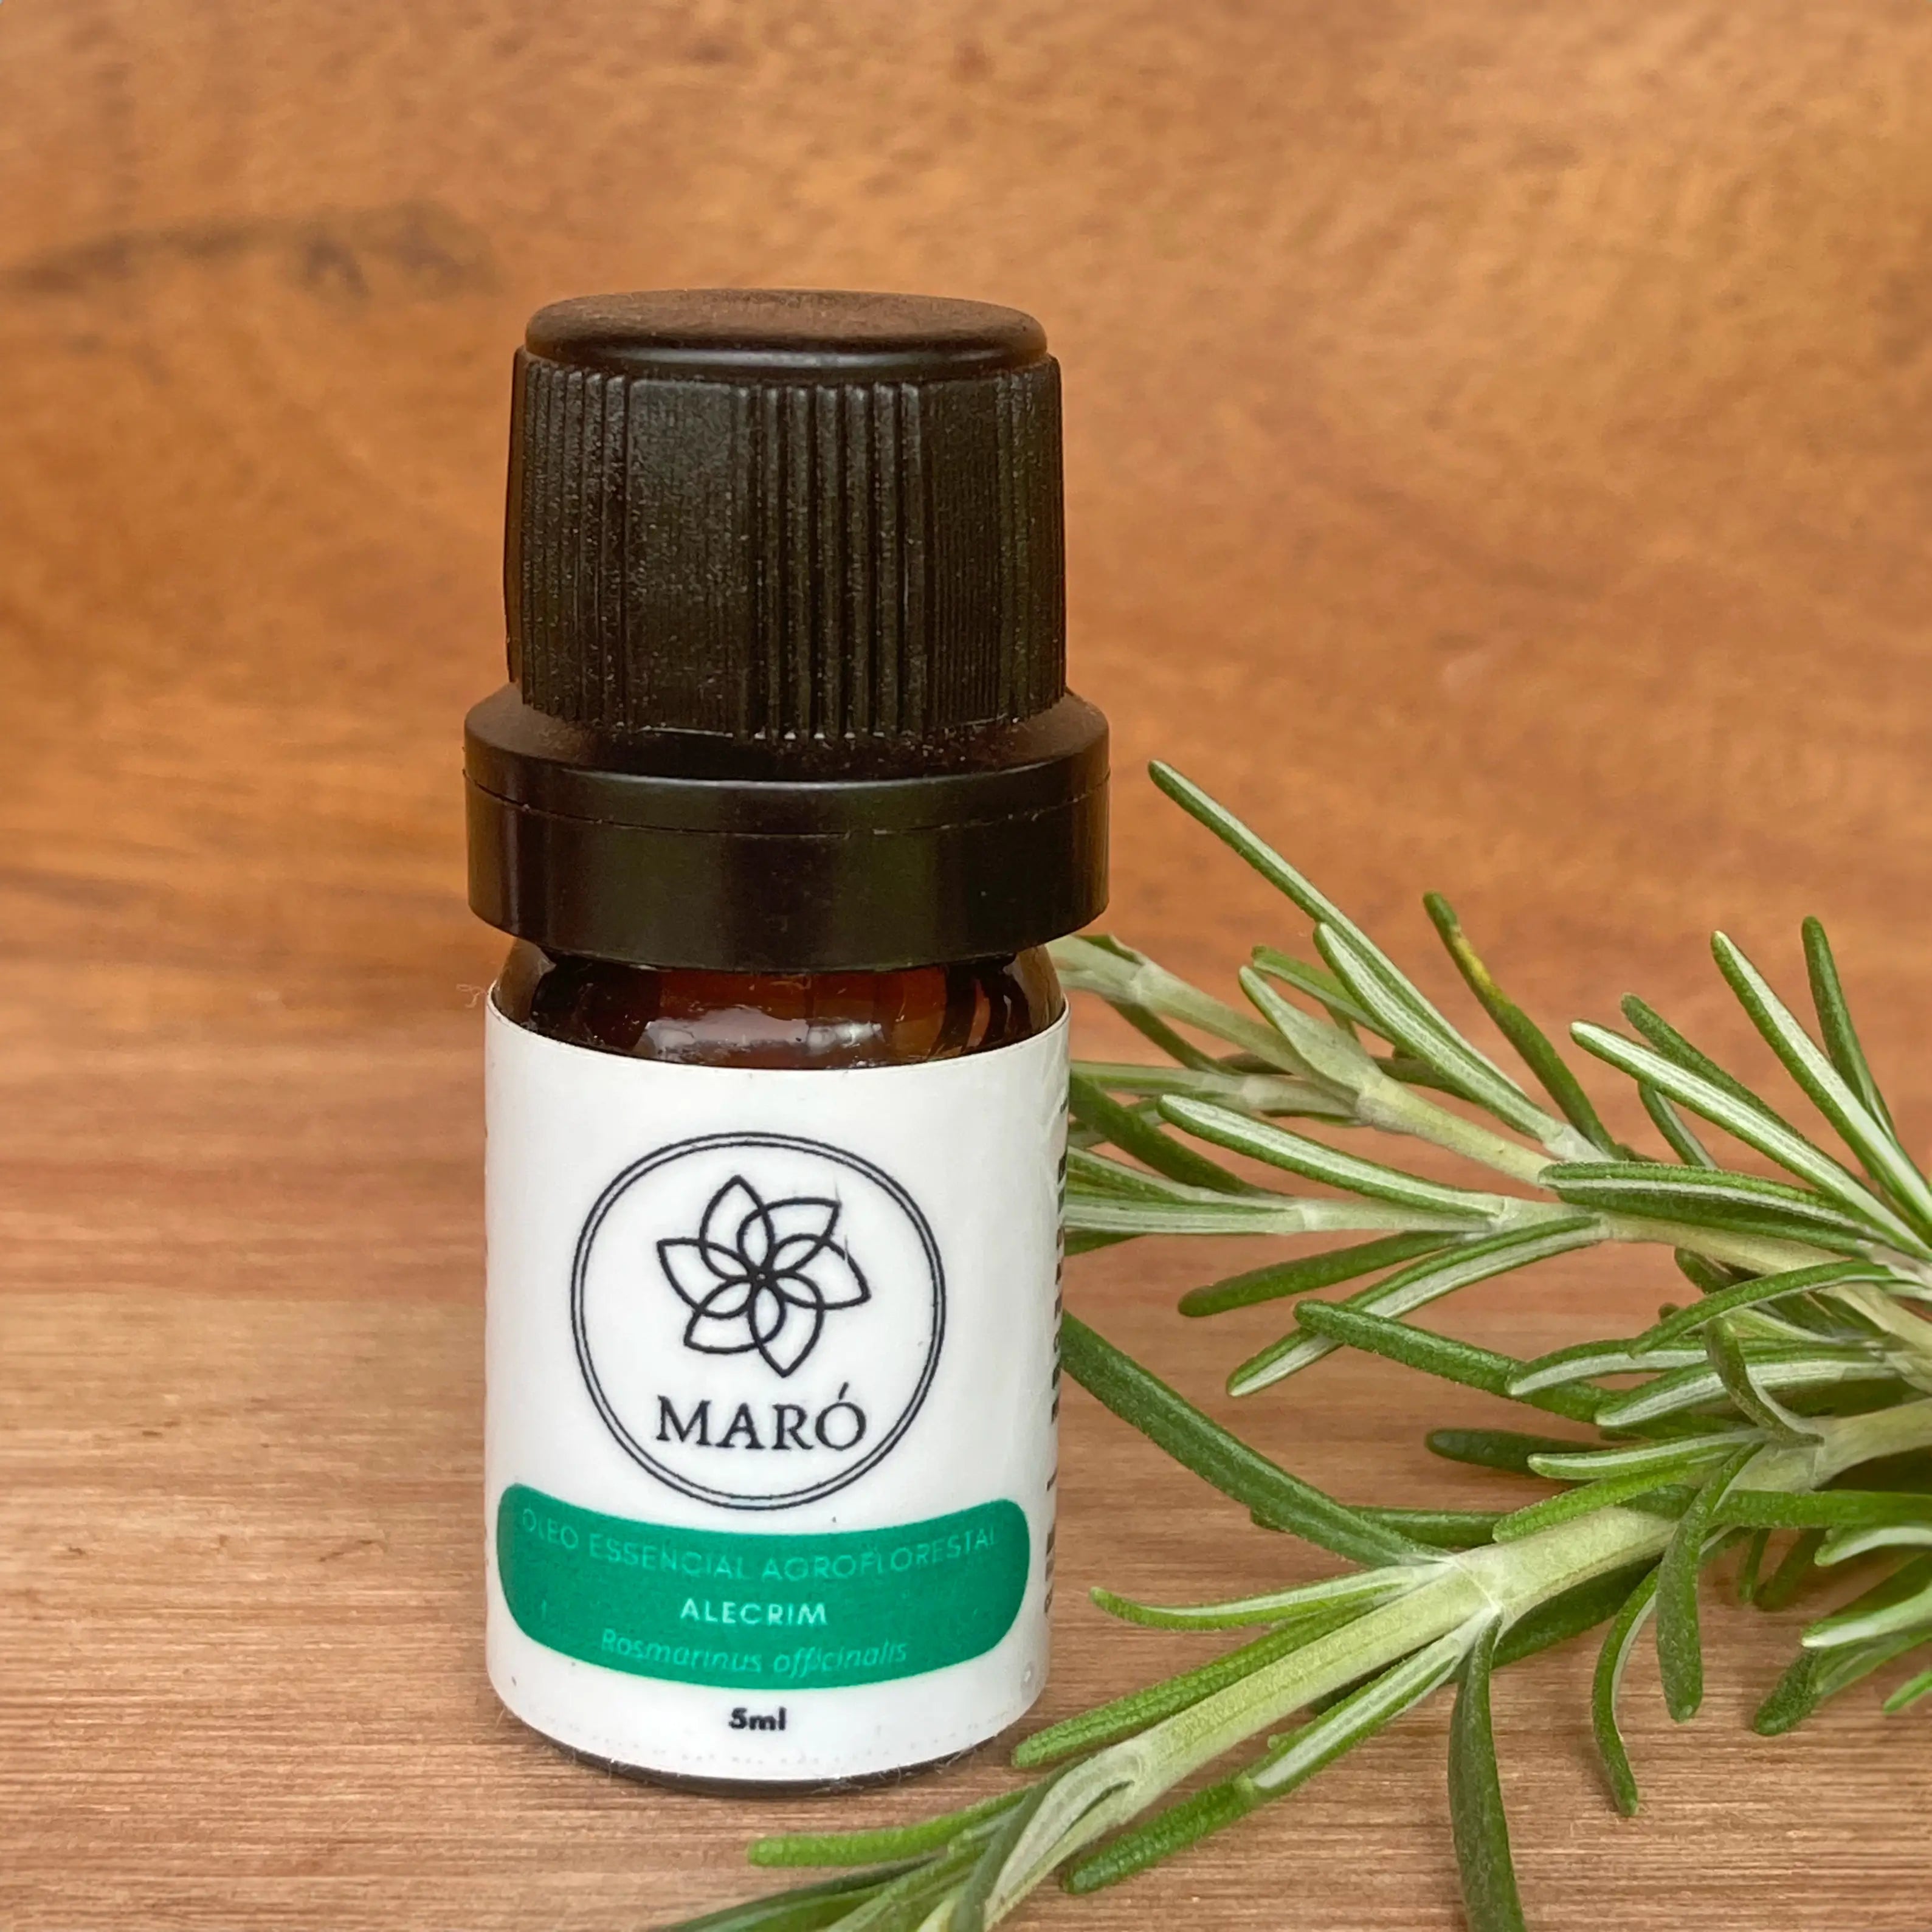 Maró Natural Rosemary Agroforestry Essential Oil 5ml